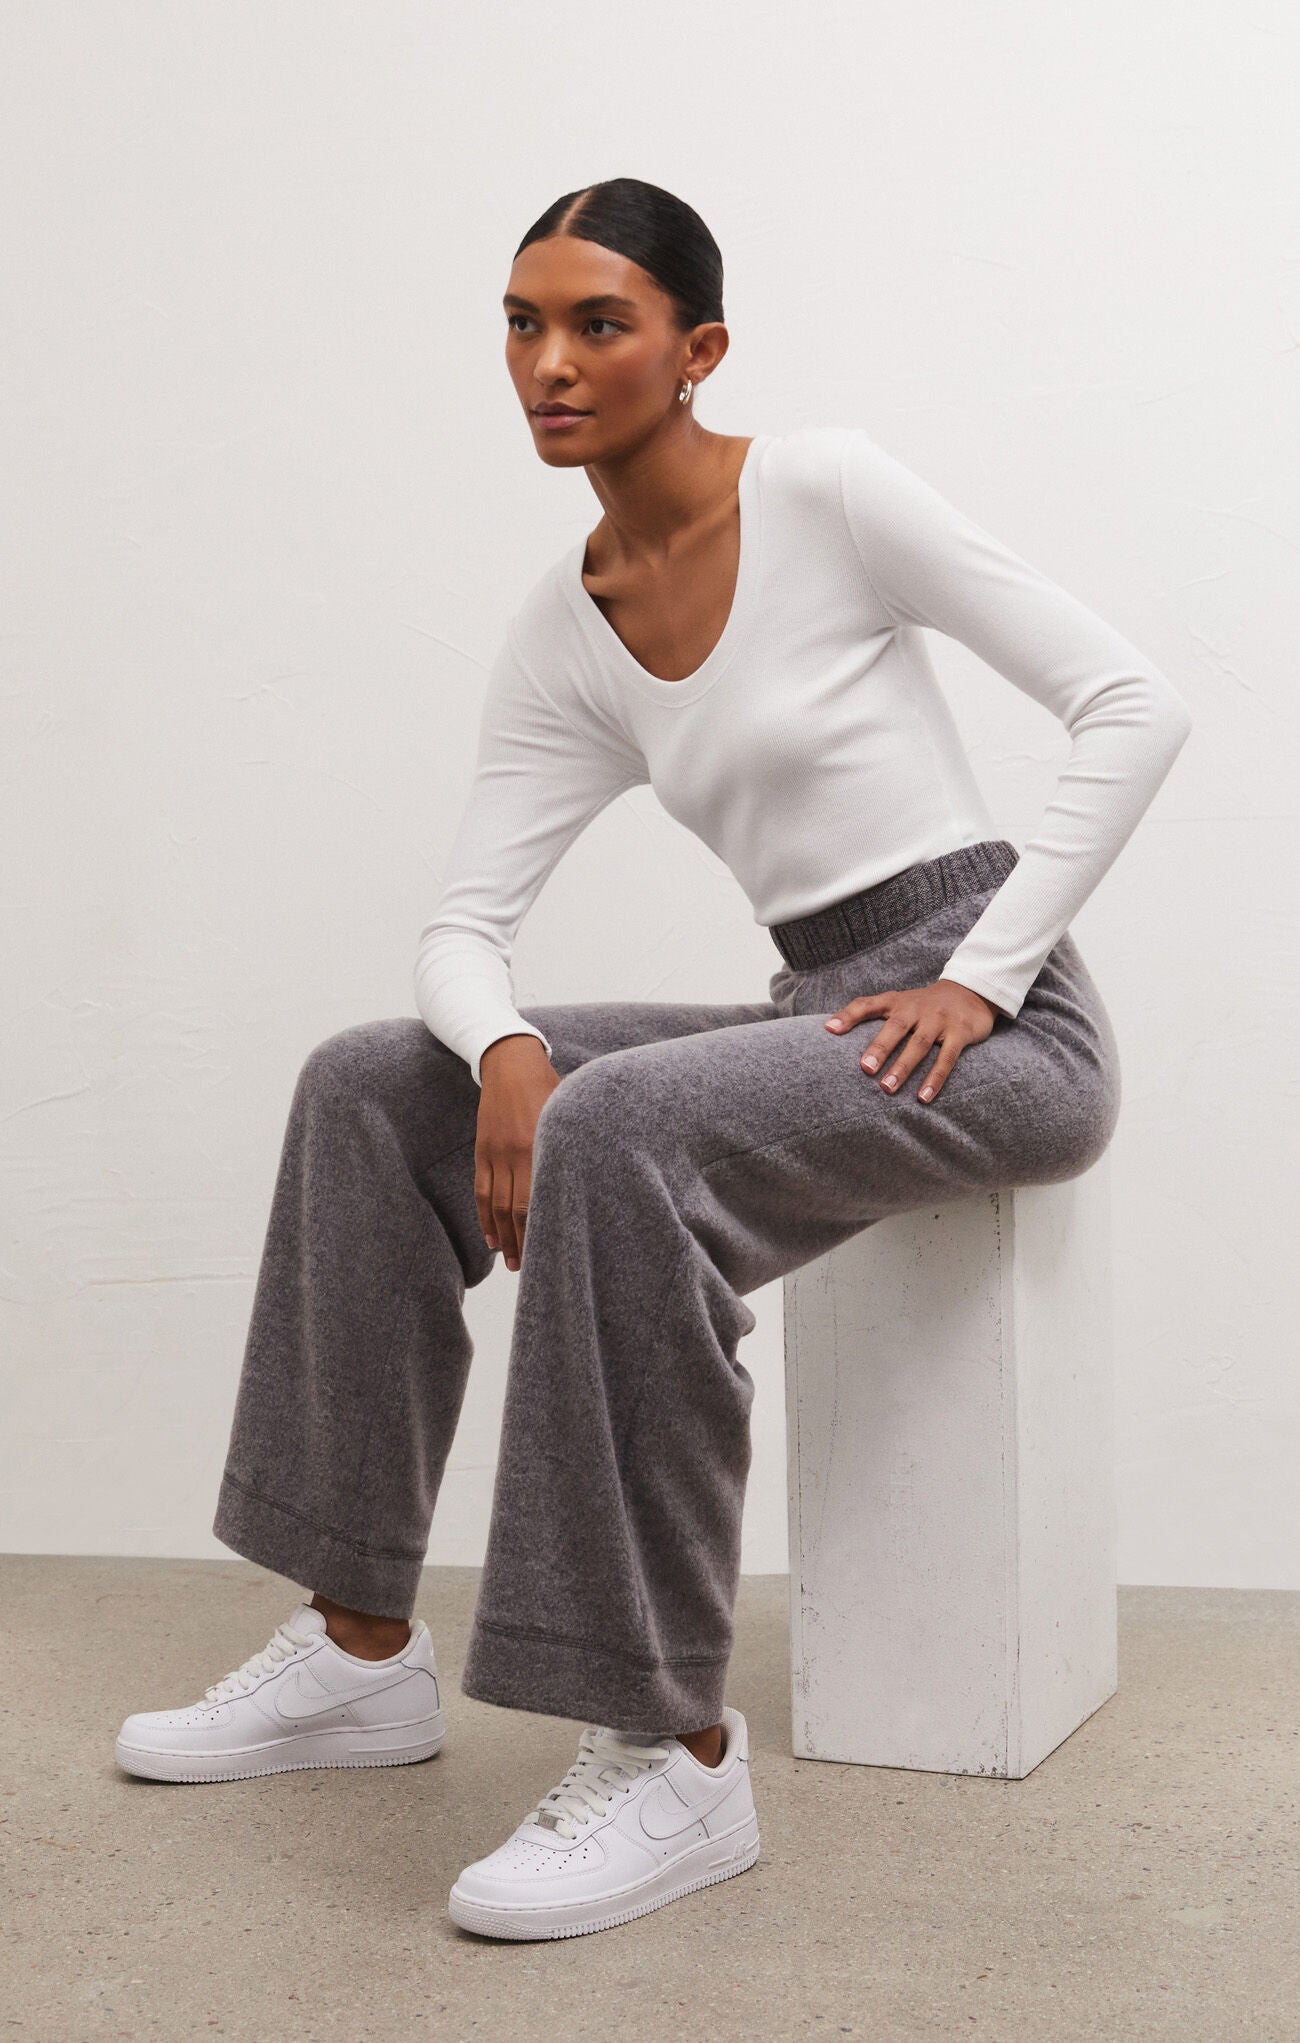 Z SUPPLY TESSA COZY PANT IN CHARCOAL HEATHER